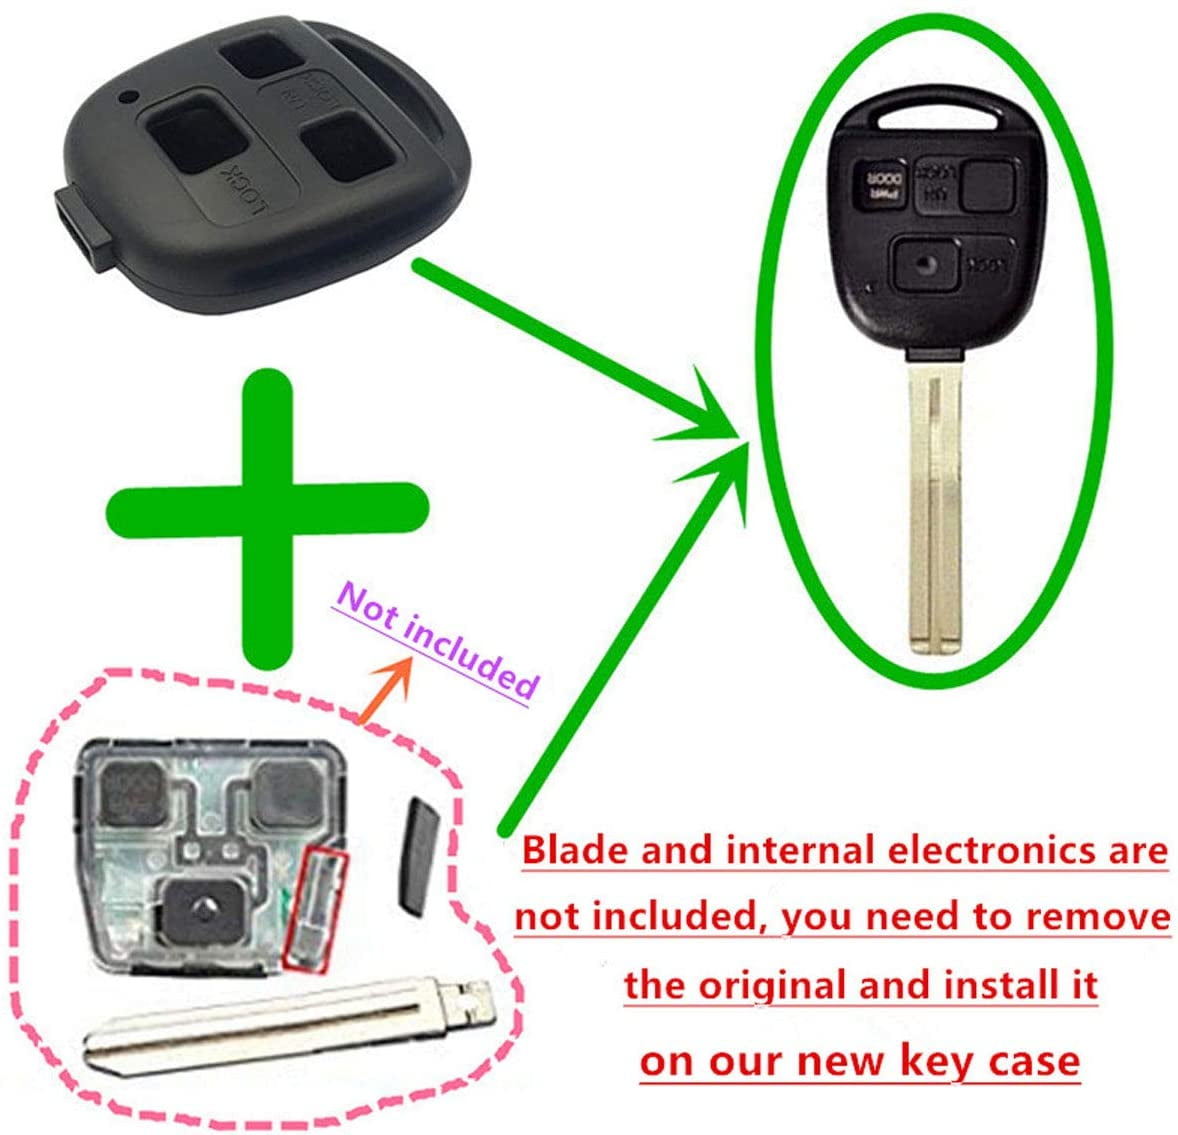 Key Fob Shell Case Replacement For Lexus Keyless Entry Remote Key Case Fit For Lexus GS300 GS400 GS430 GX470 IS300 LS400 LS430 LX470 RX300 RX330 RX350 RX400h RX450h SC430 